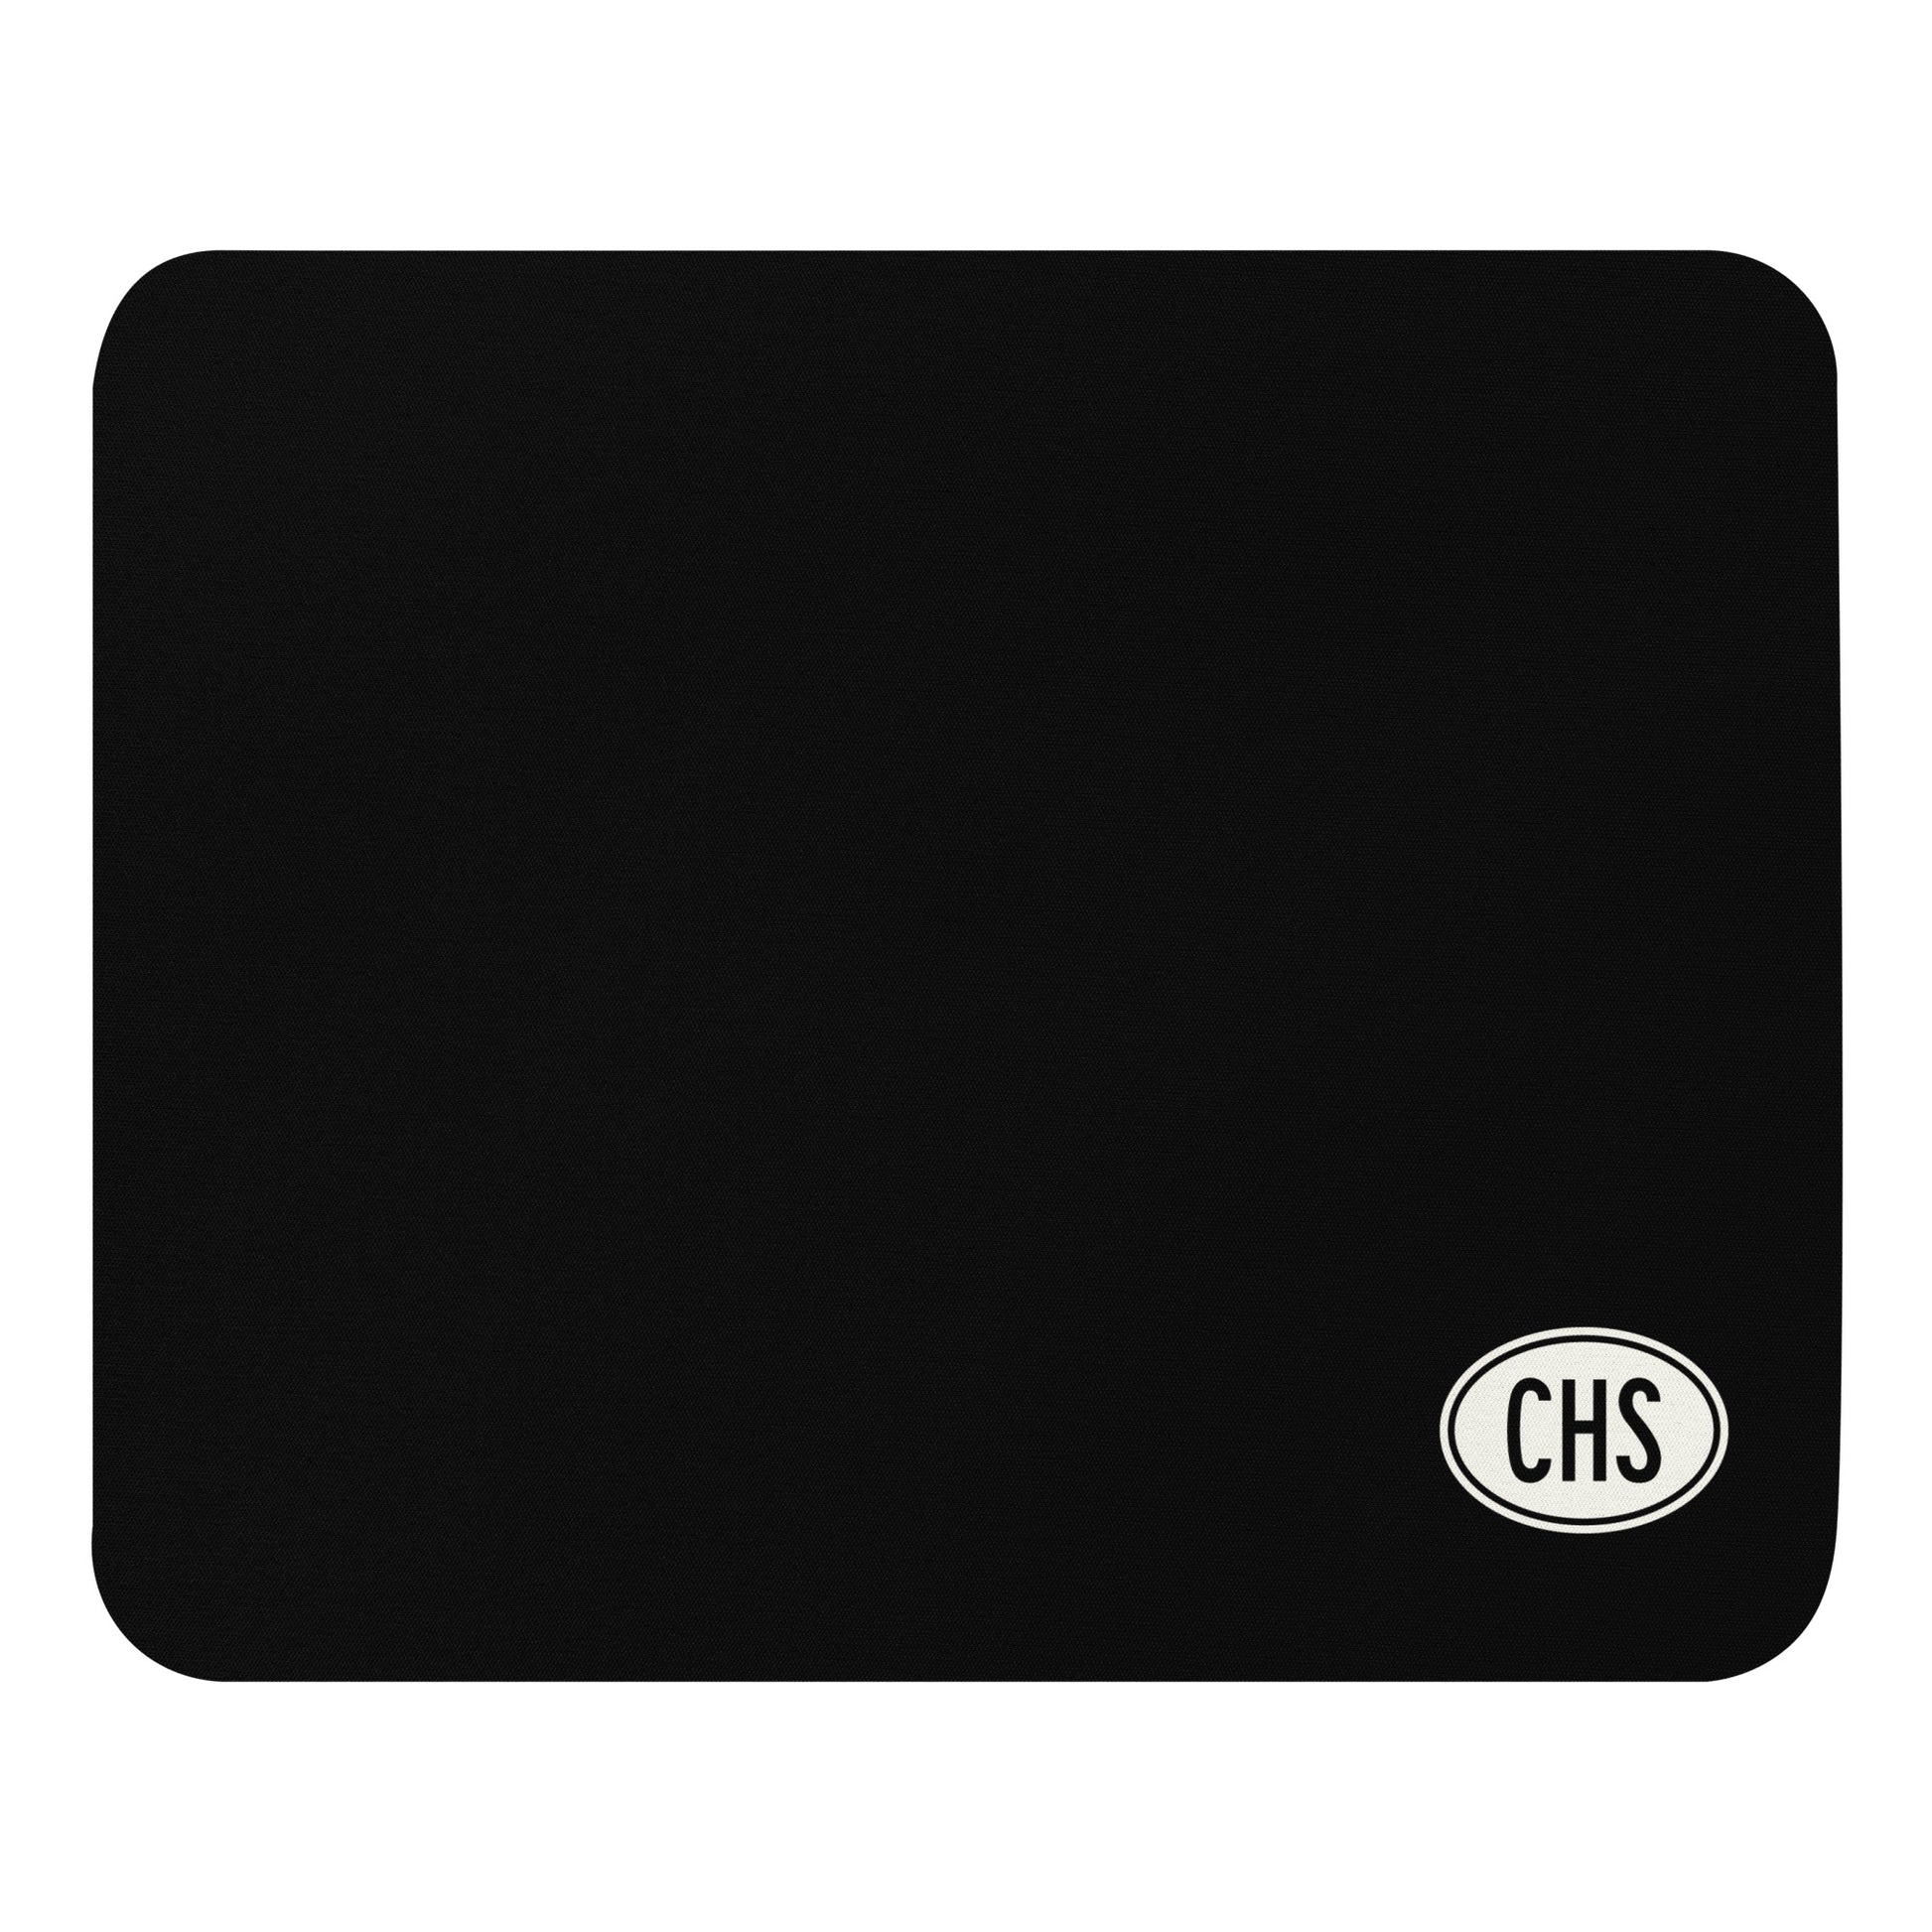 Unique Travel Gift Mouse Pad - White Oval • CHS Charleston • YHM Designs - Image 01